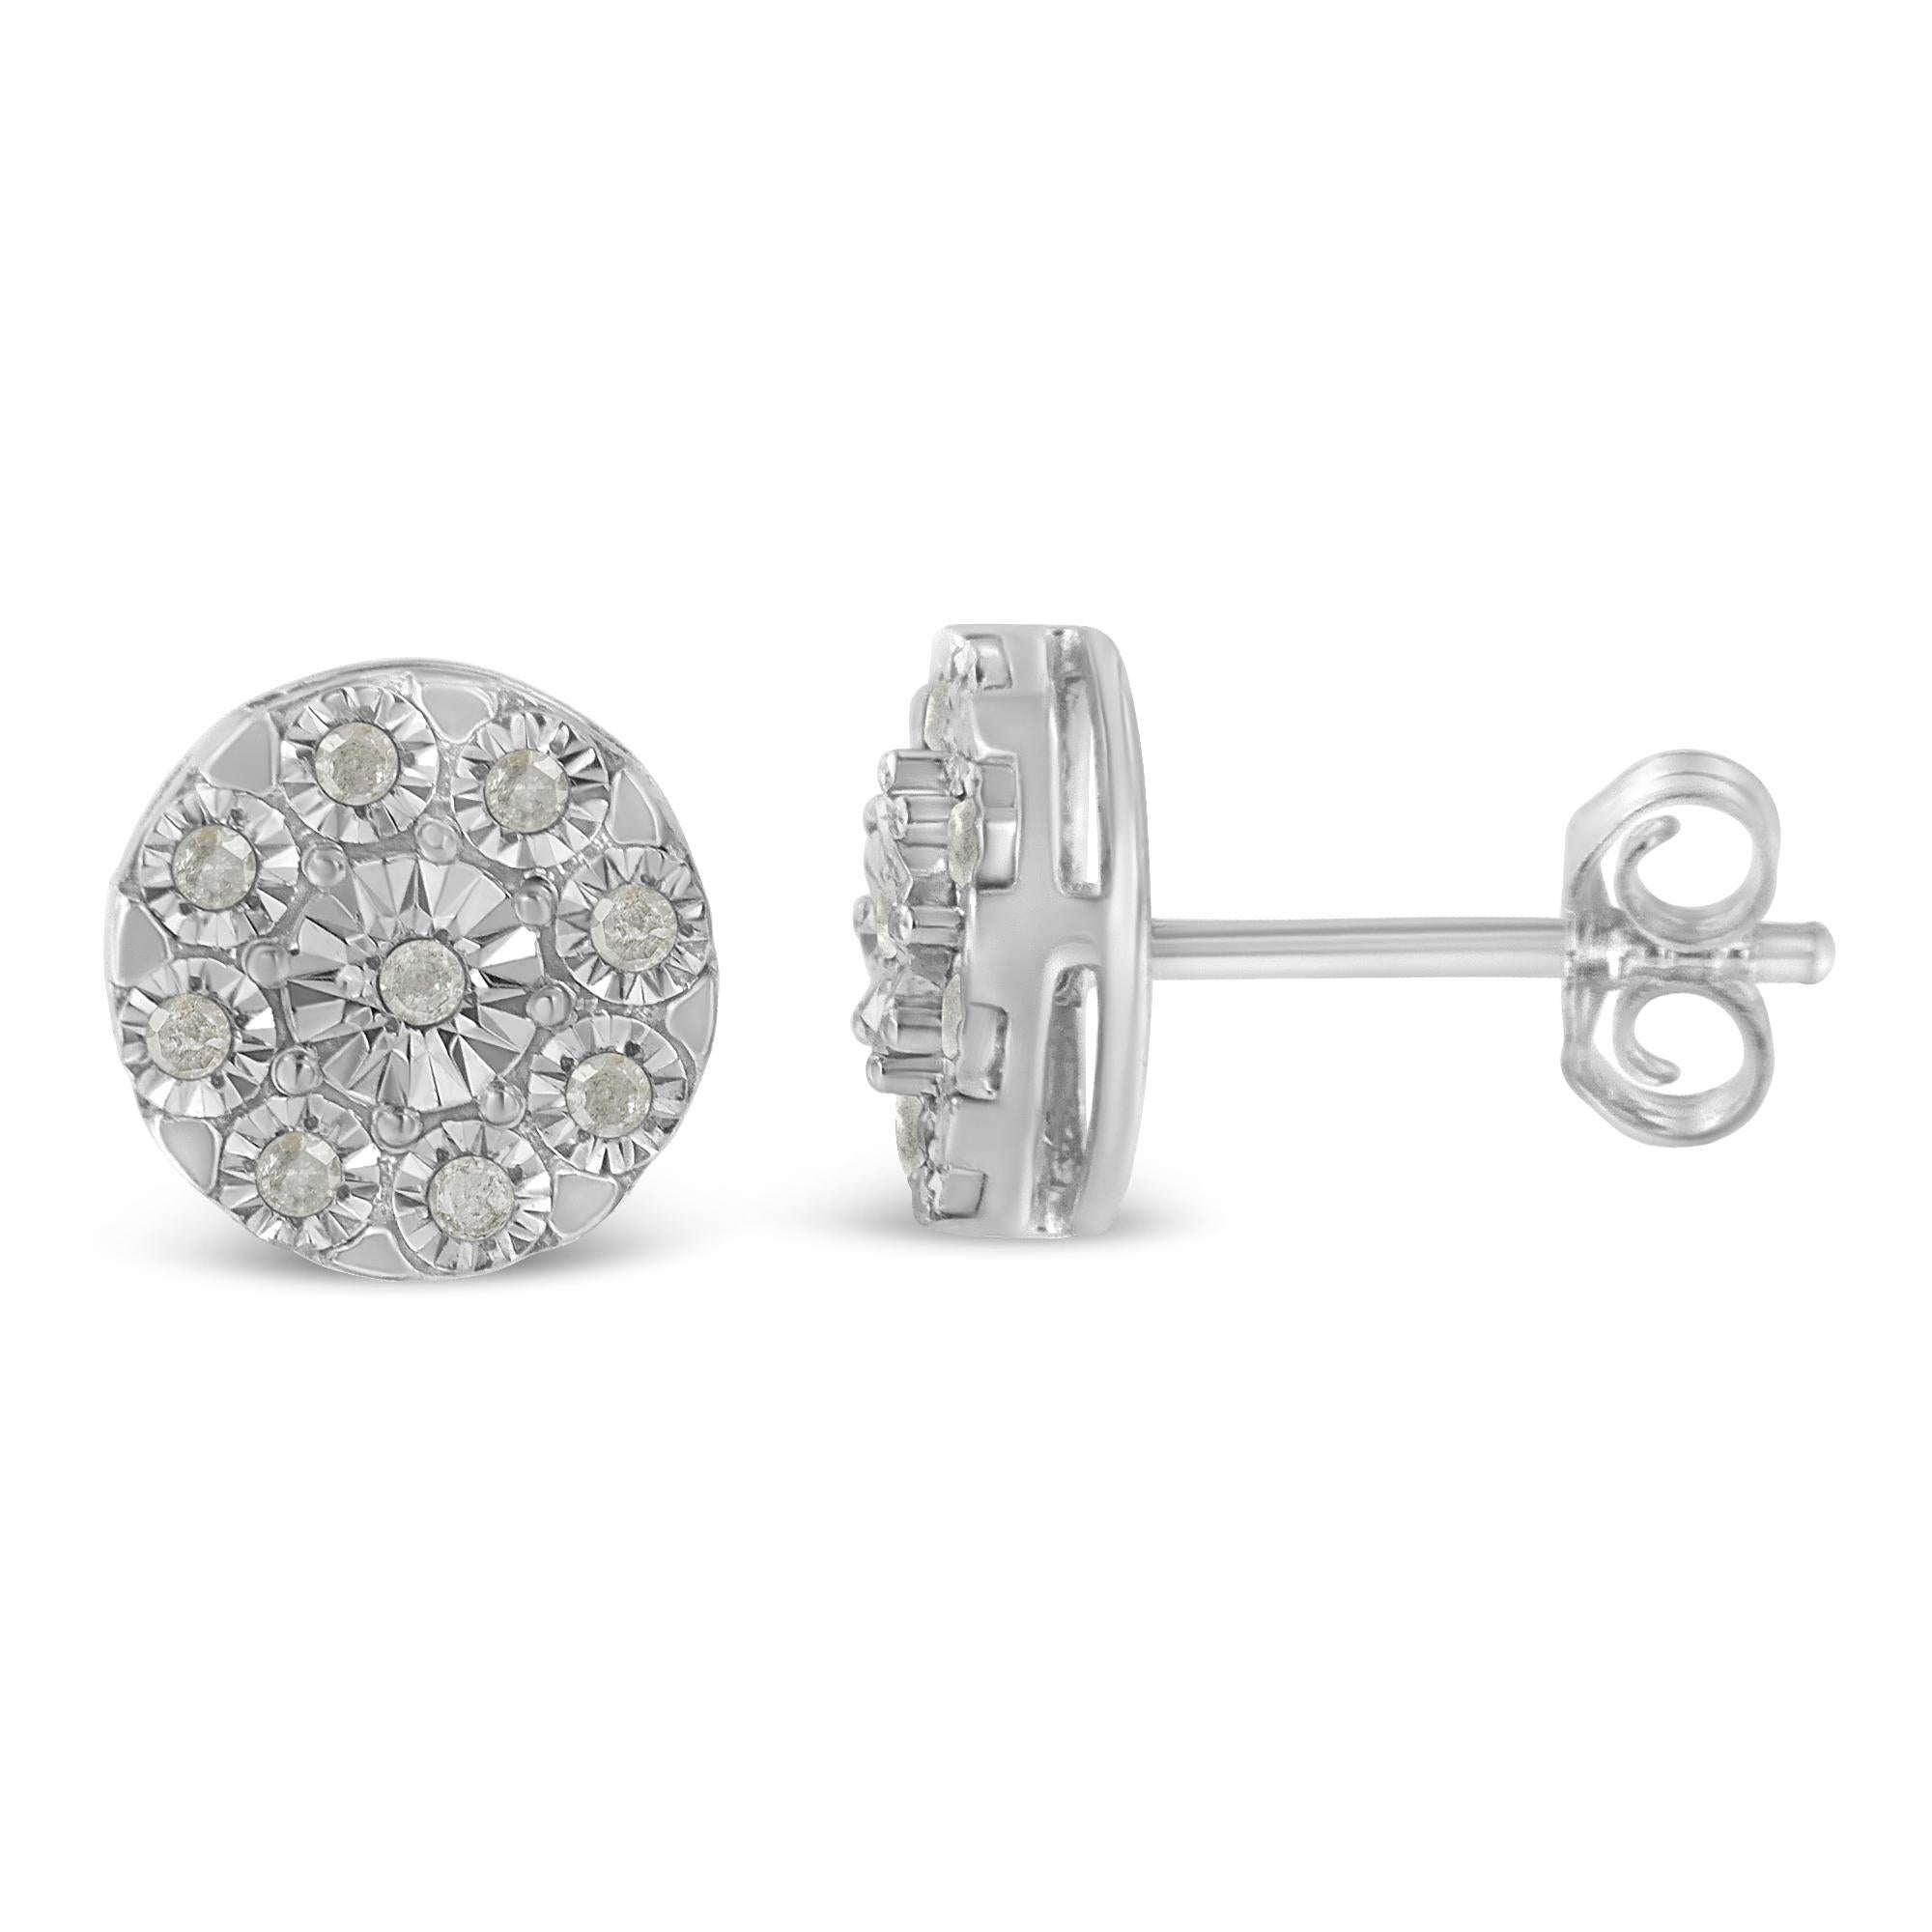 Elegant and timeless, these gorgeous .925 sterling silver stud earrings feature 1/5 carat total weight of round, rose cut diamonds in a floral cluster. Each earring has nine diamonds each set in our unique miracle-plate setting, which centers each